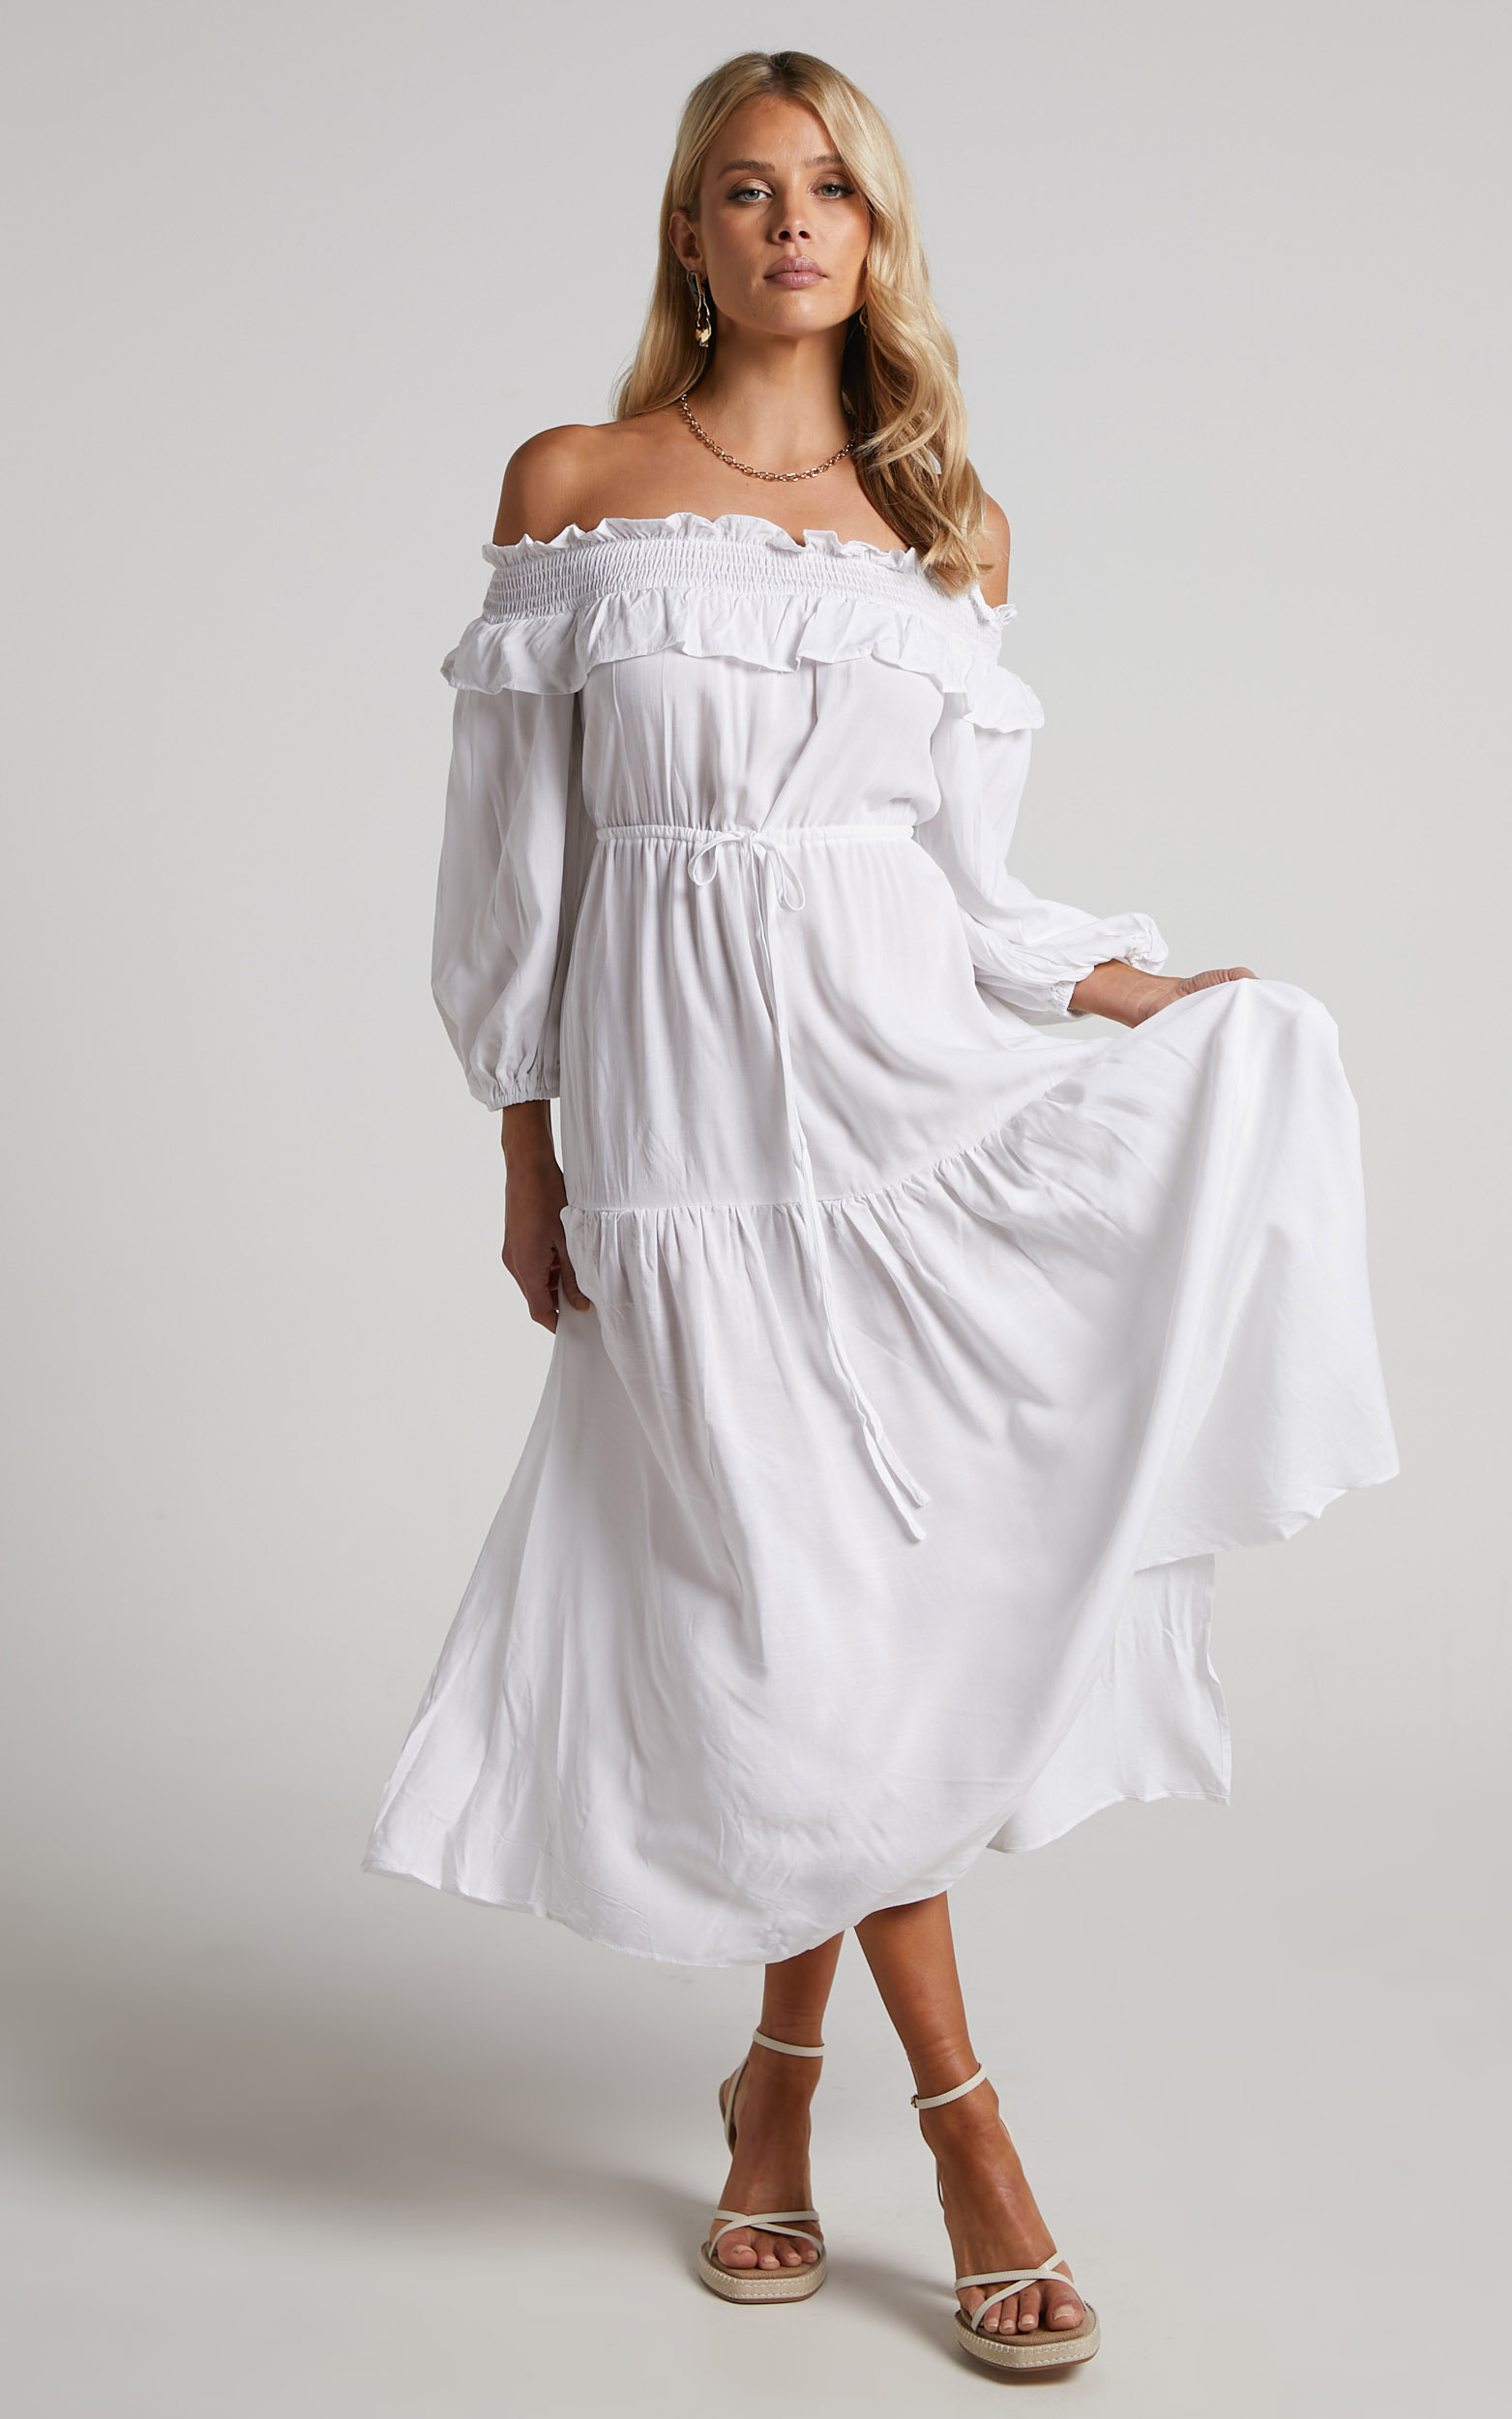 Millania Midi Dress - Off Shoulder Long Sleeve Tiered Dress in White - 04, WHT1, hi-res image number null